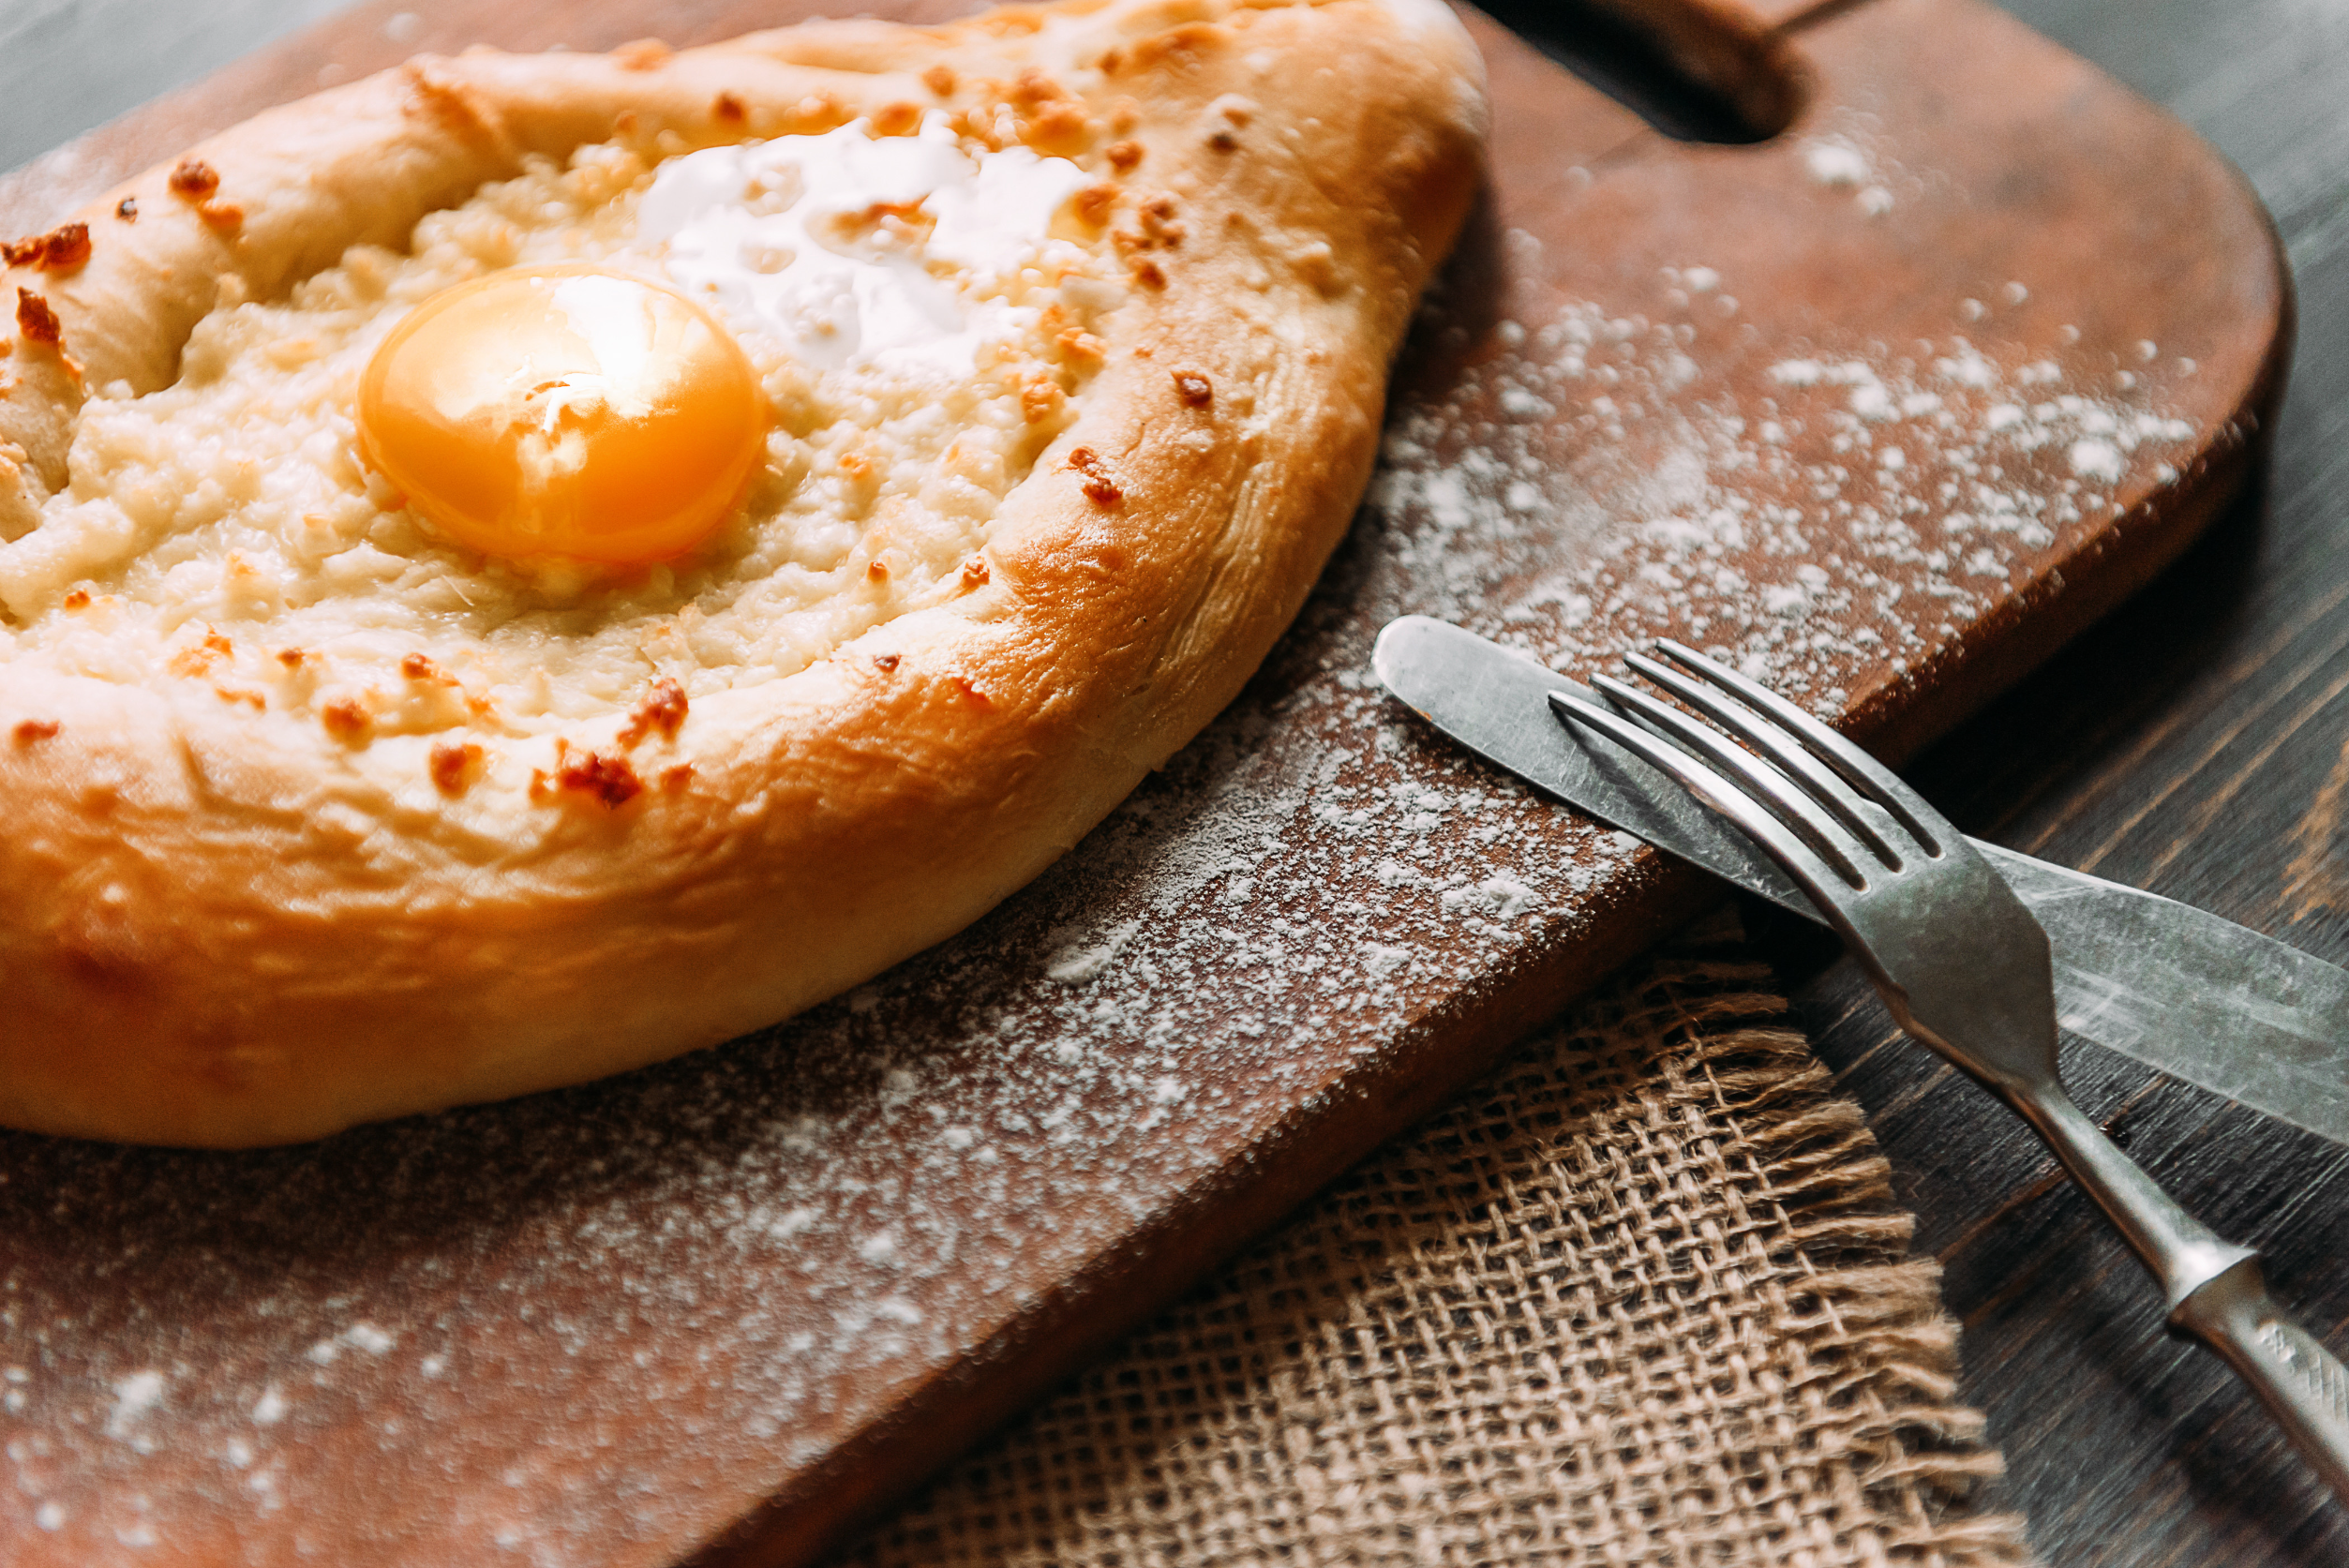 Directly above view of Khachapuri - traditional Georgian pastry with cheese and egg